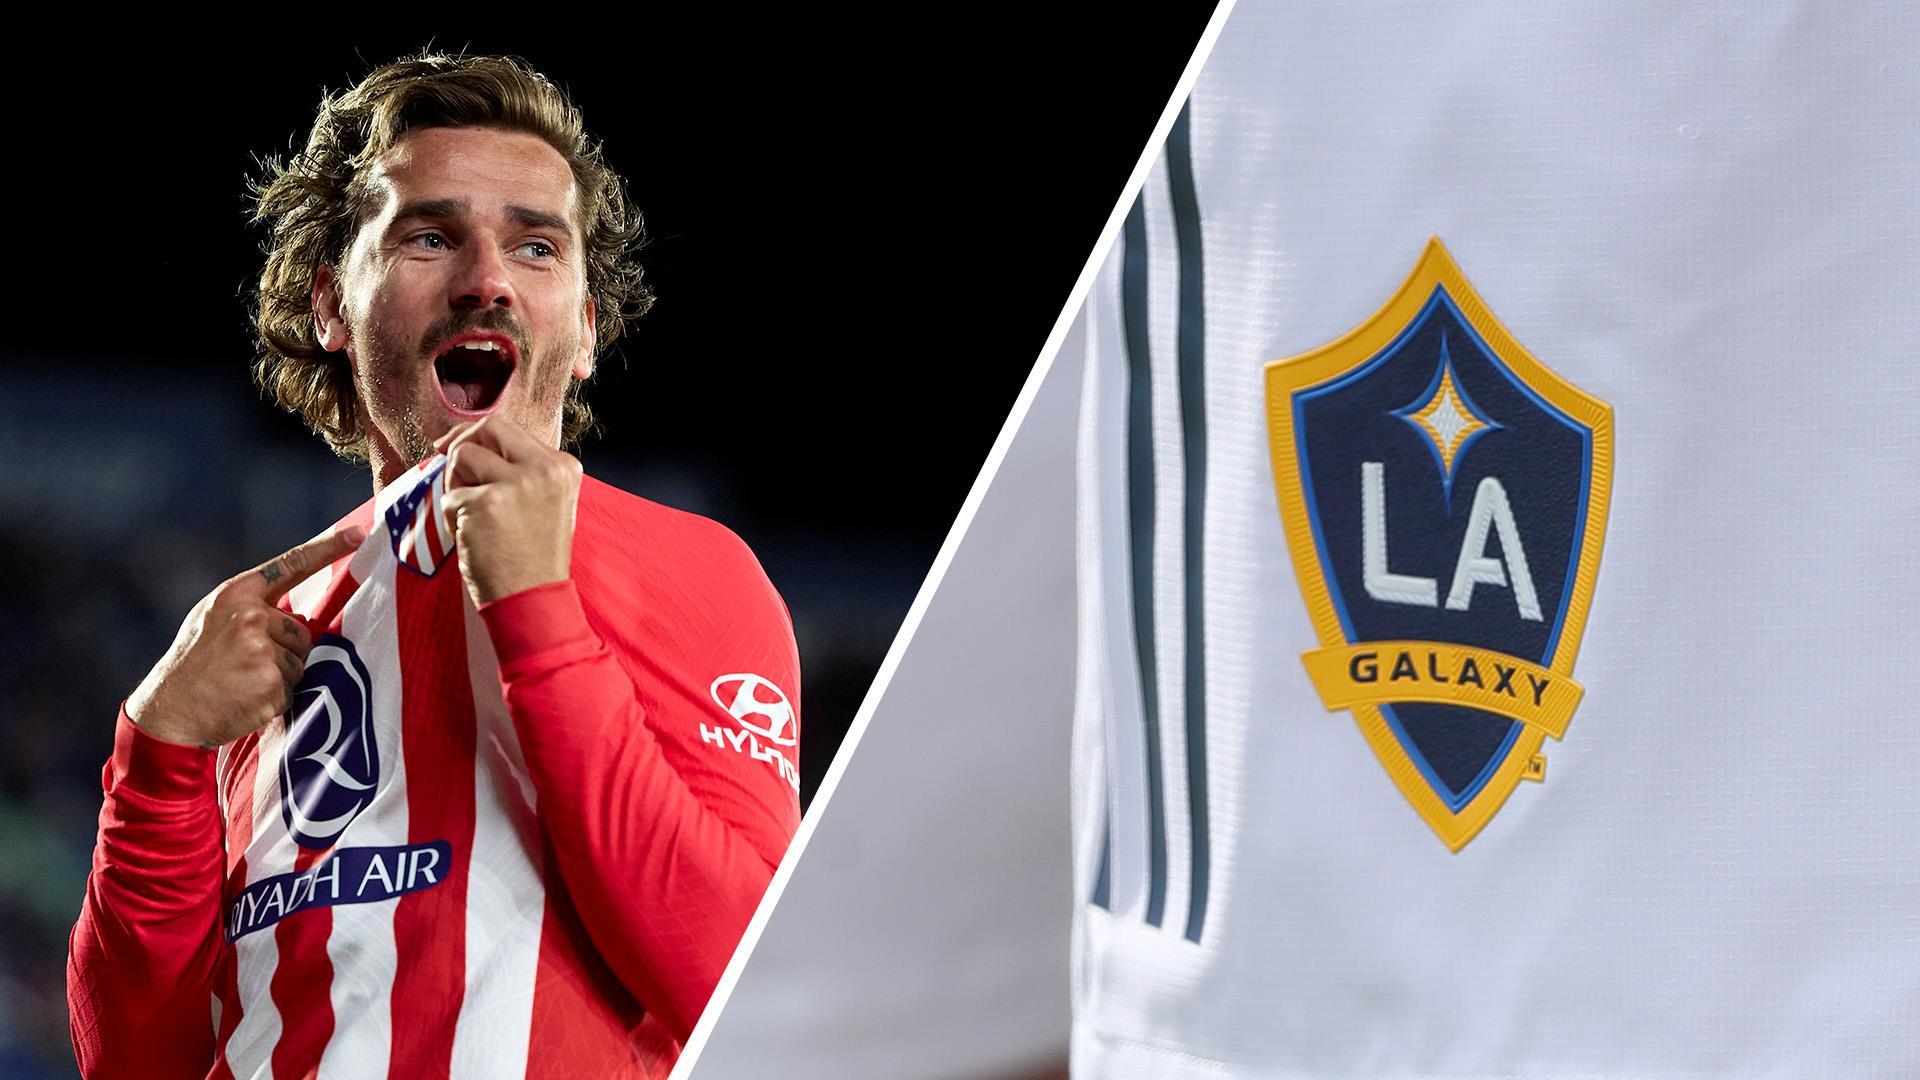 Why LA Galaxy would be the perfect fit for Antoine Griezmann